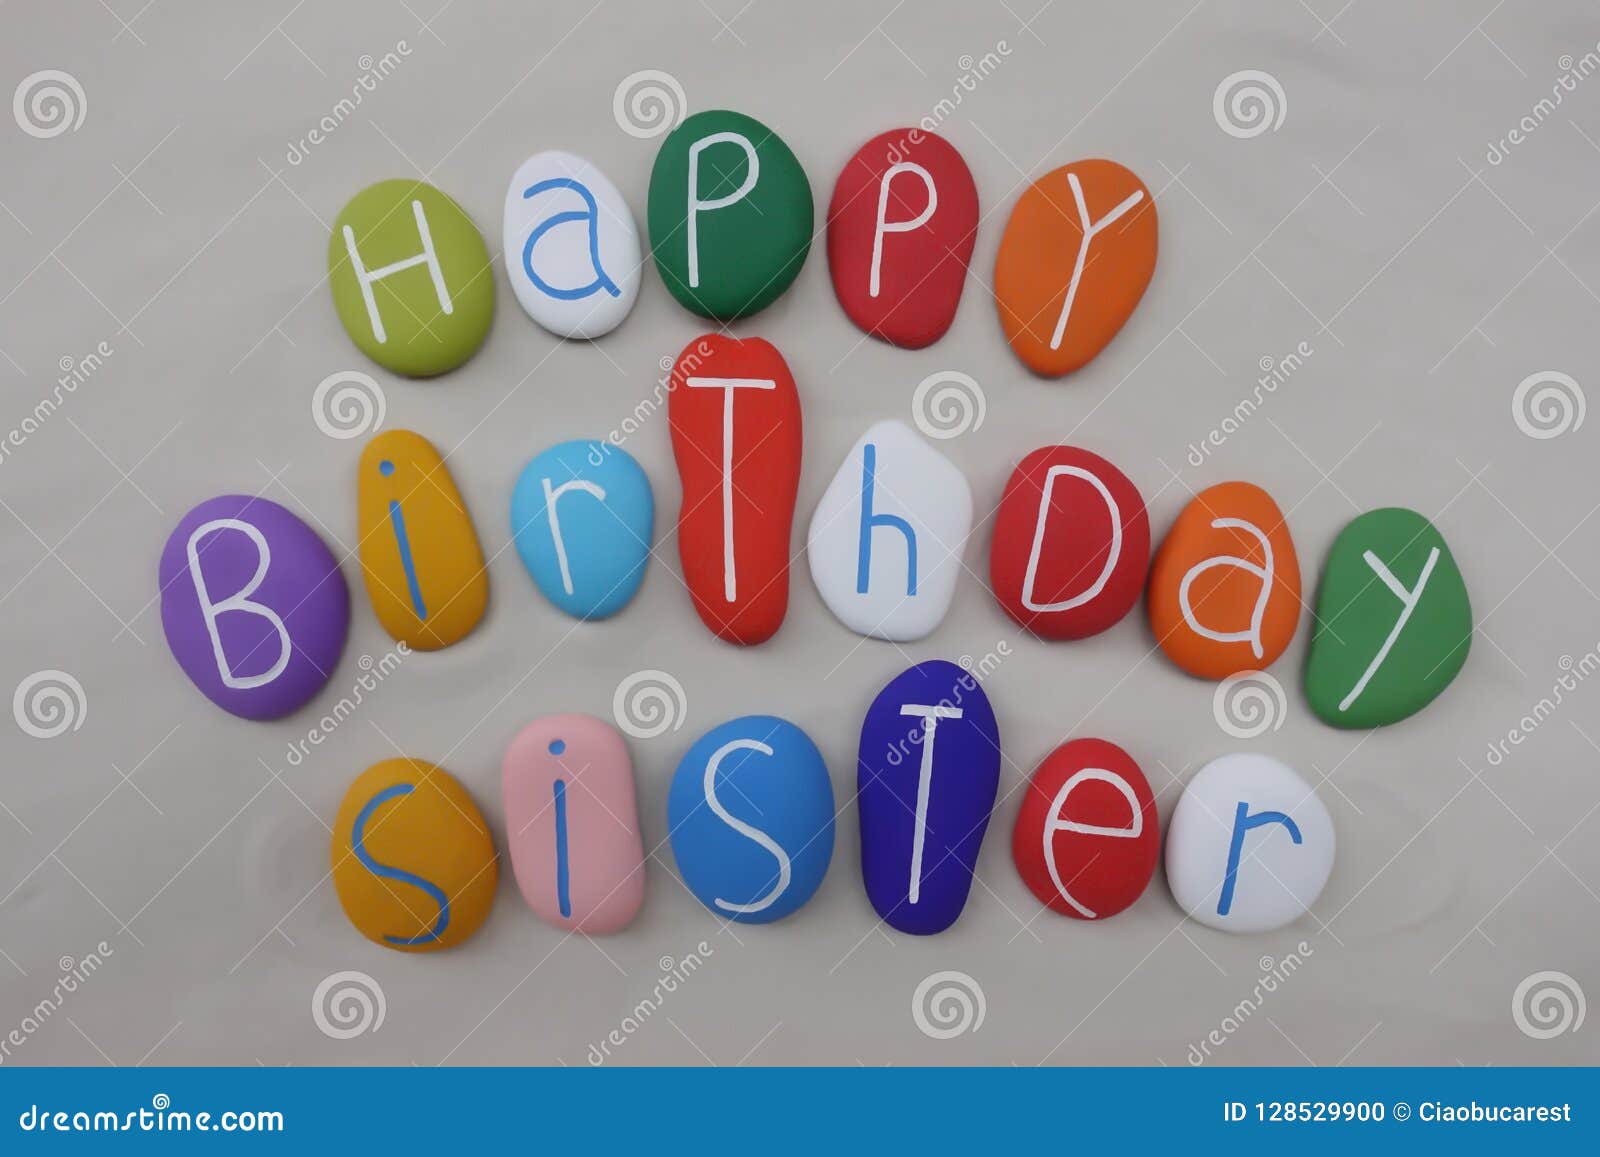 happy birthday sister with colored stones over white sand